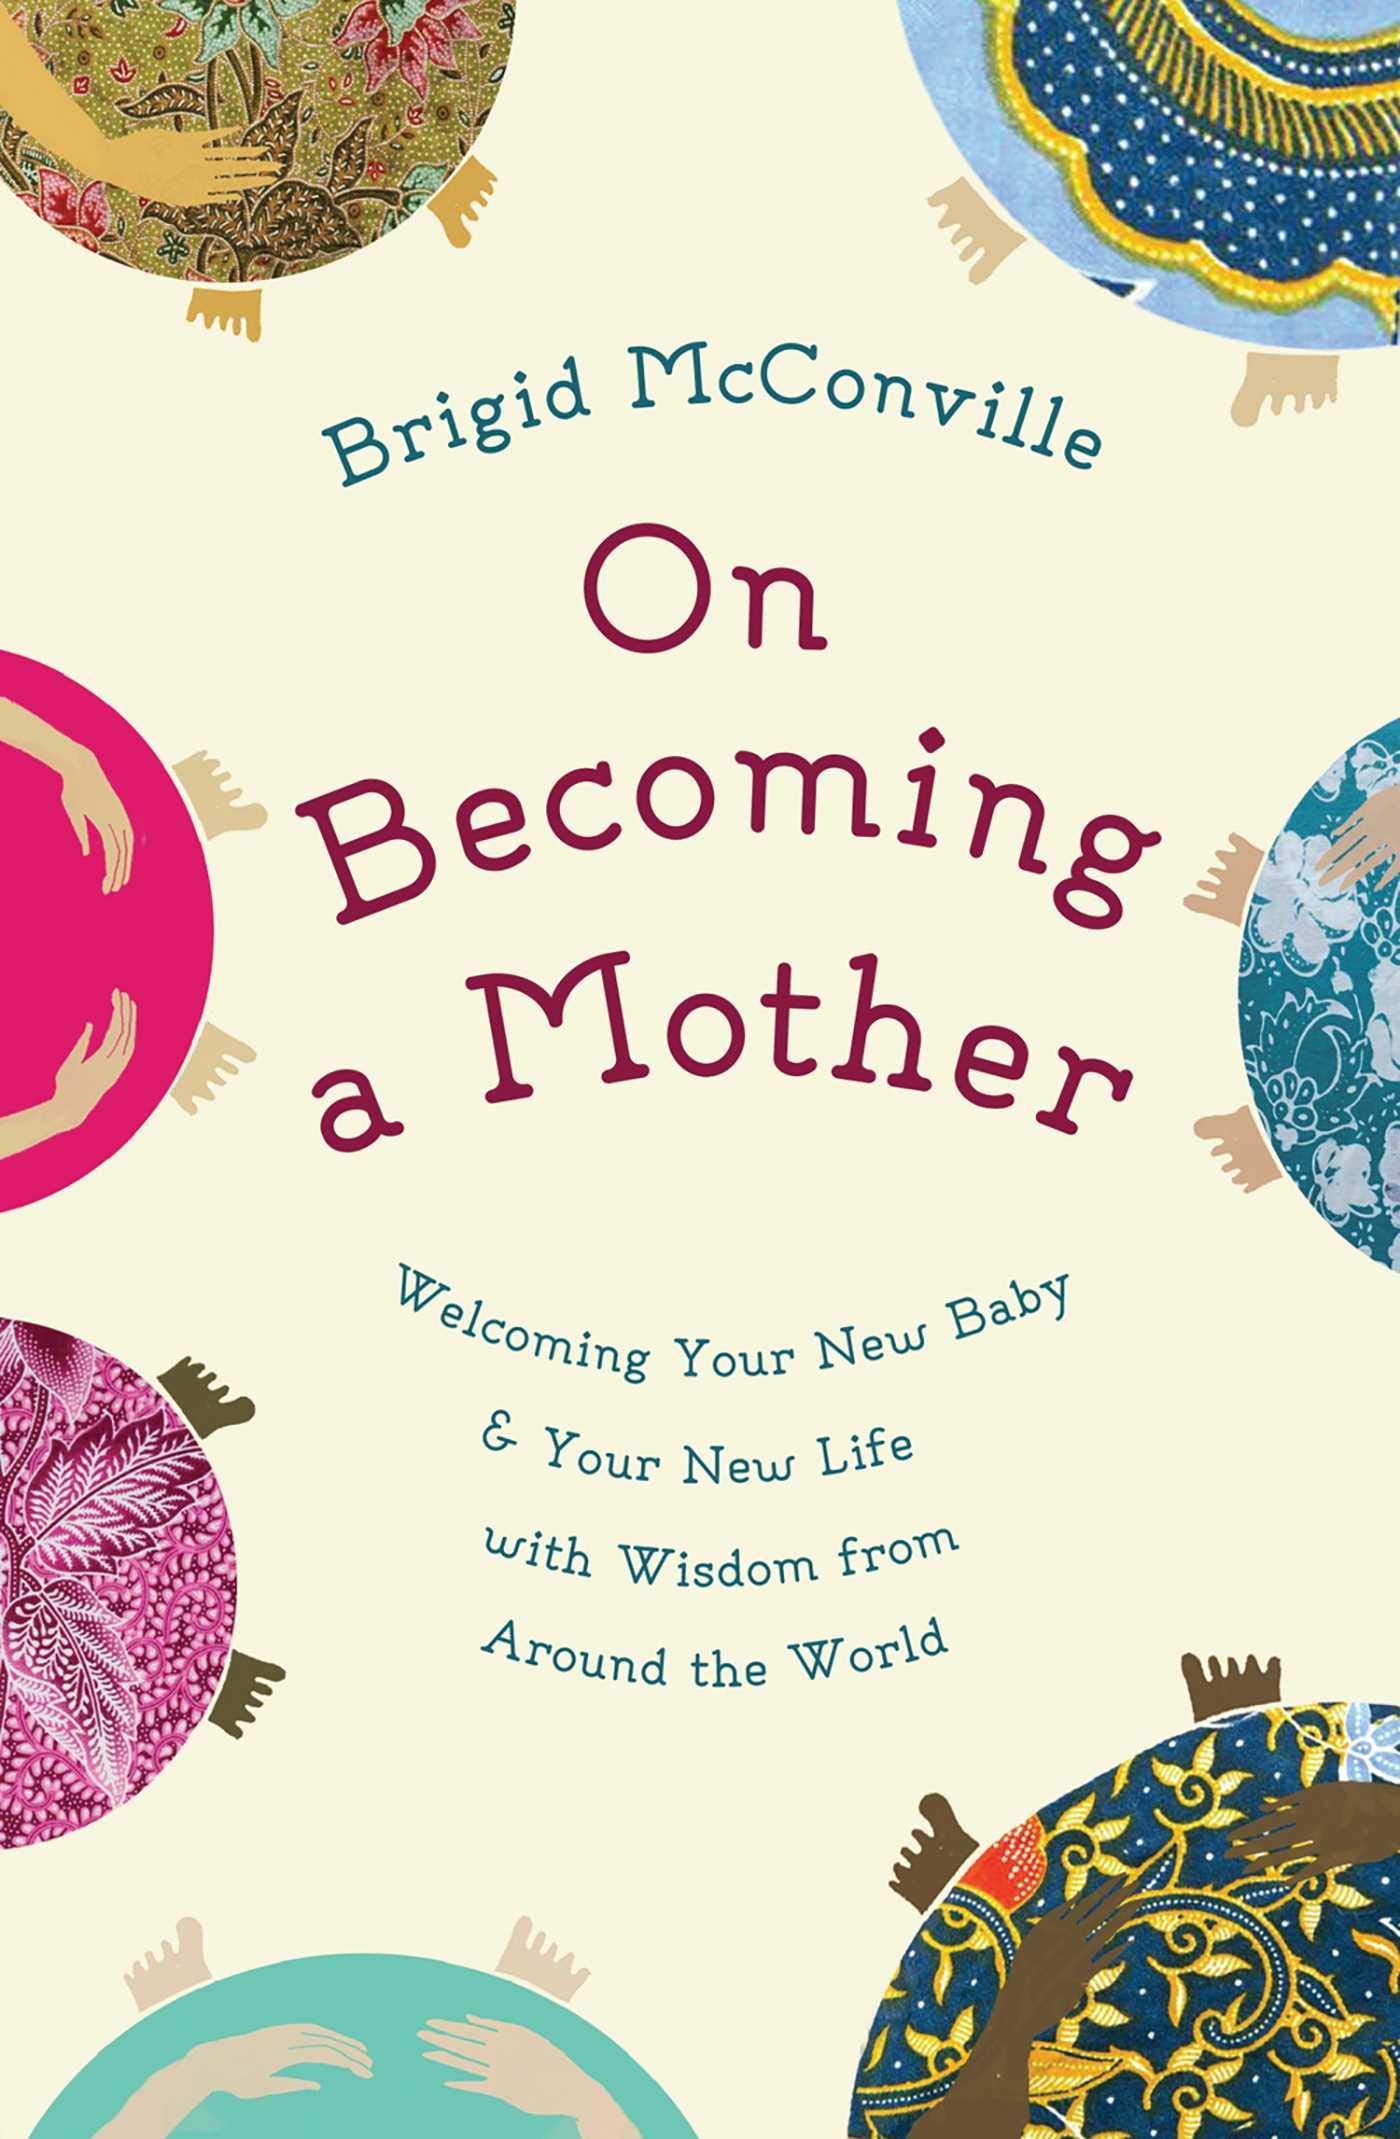 On Becoming a Mother: Welcoming Your New Baby and Your New Life with Wisdom from Around the World